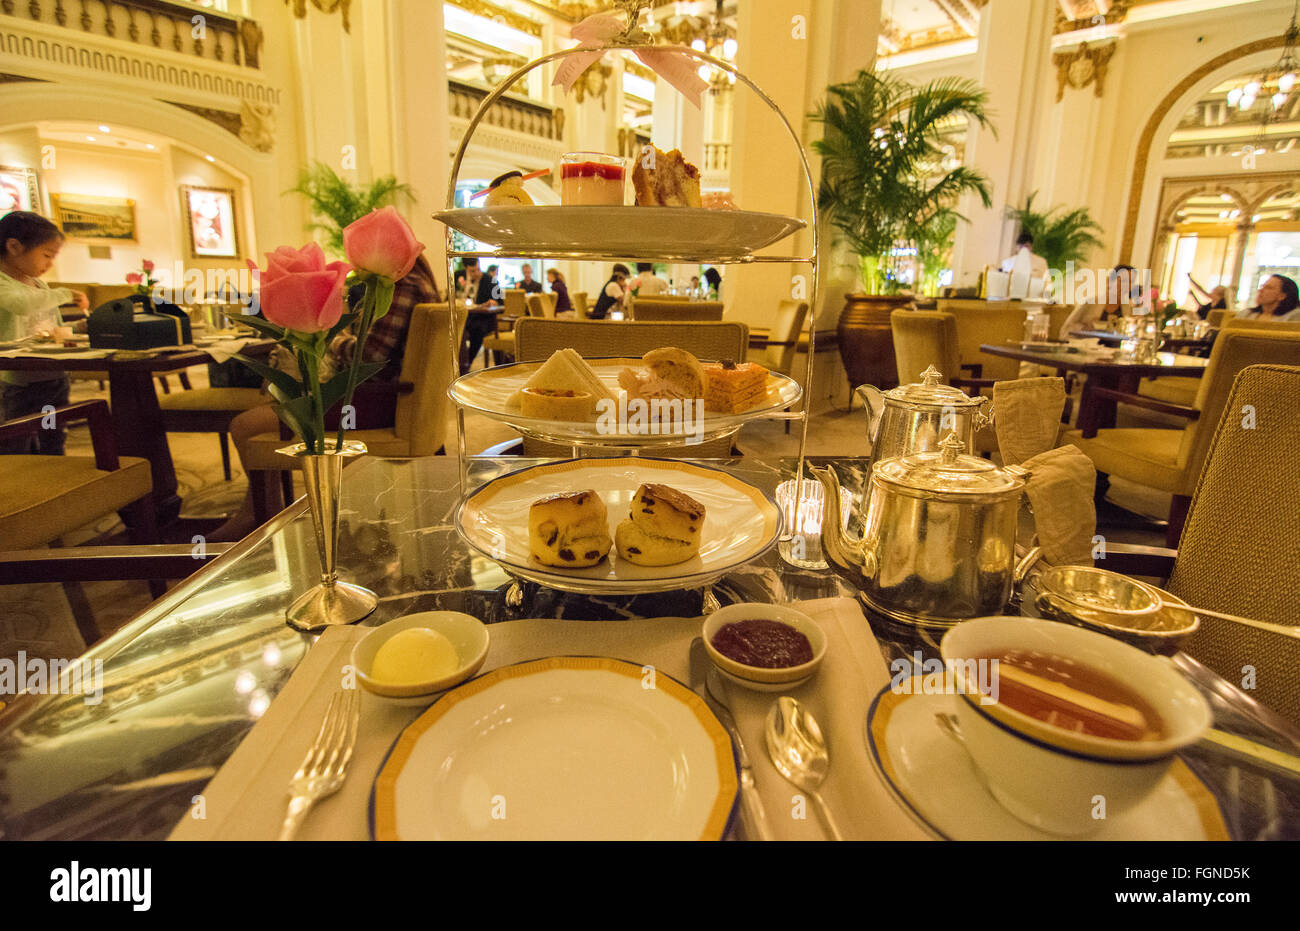 Hong Kong China Peninsula Hotel lobby excclusive High Tea with tea Afternoon Tea of cakes and finger sandwichs at table Stock Photo